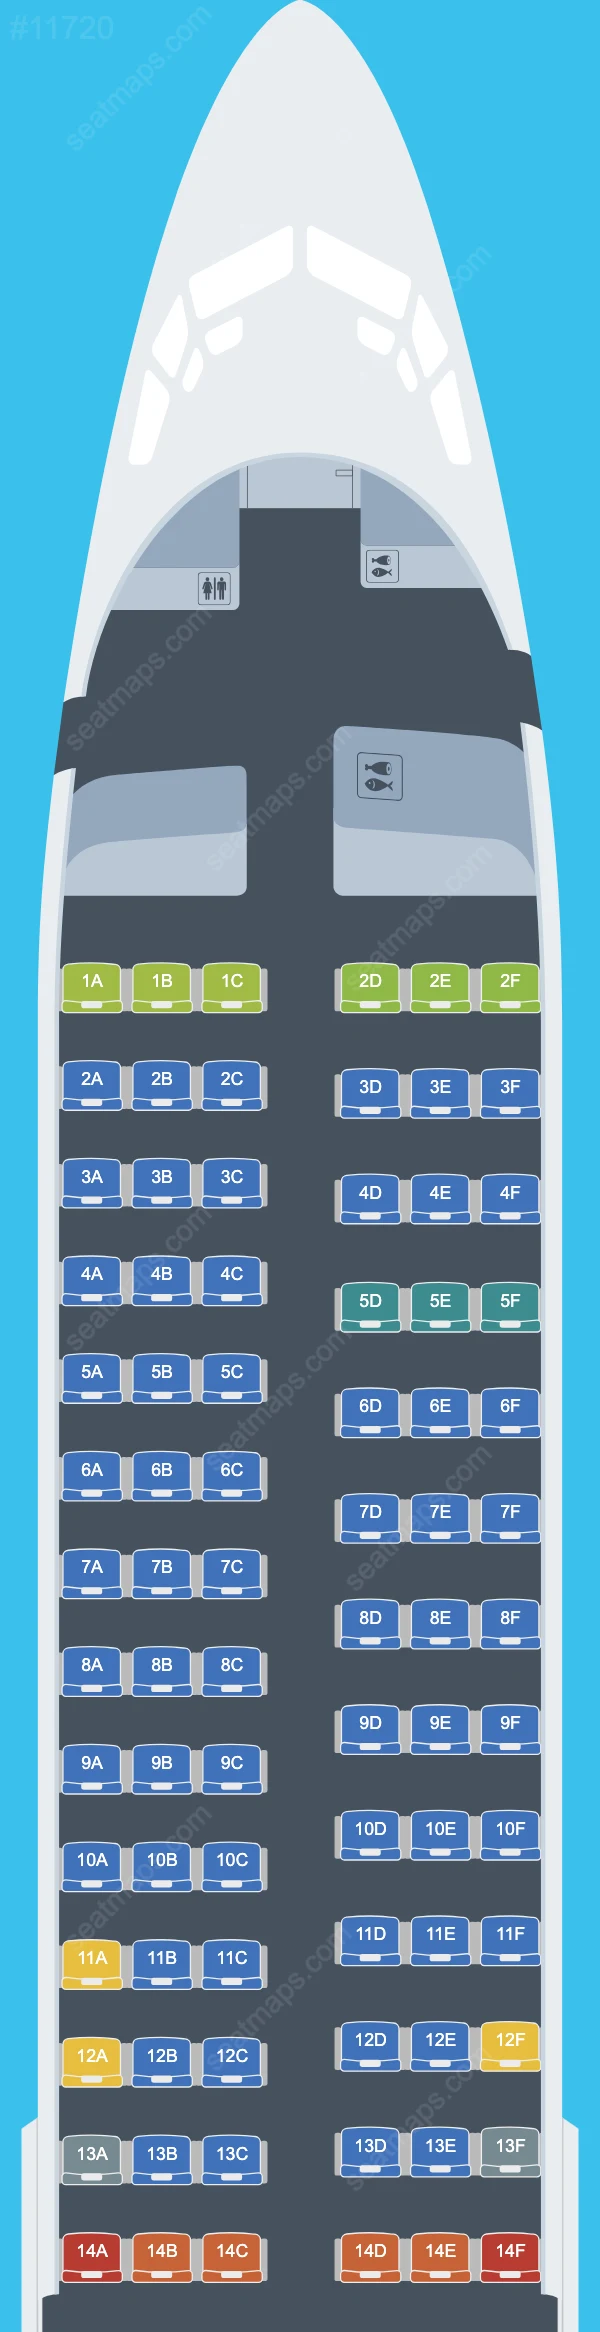 SkyUp MT Boeing 737 aircraft seat map  737-800